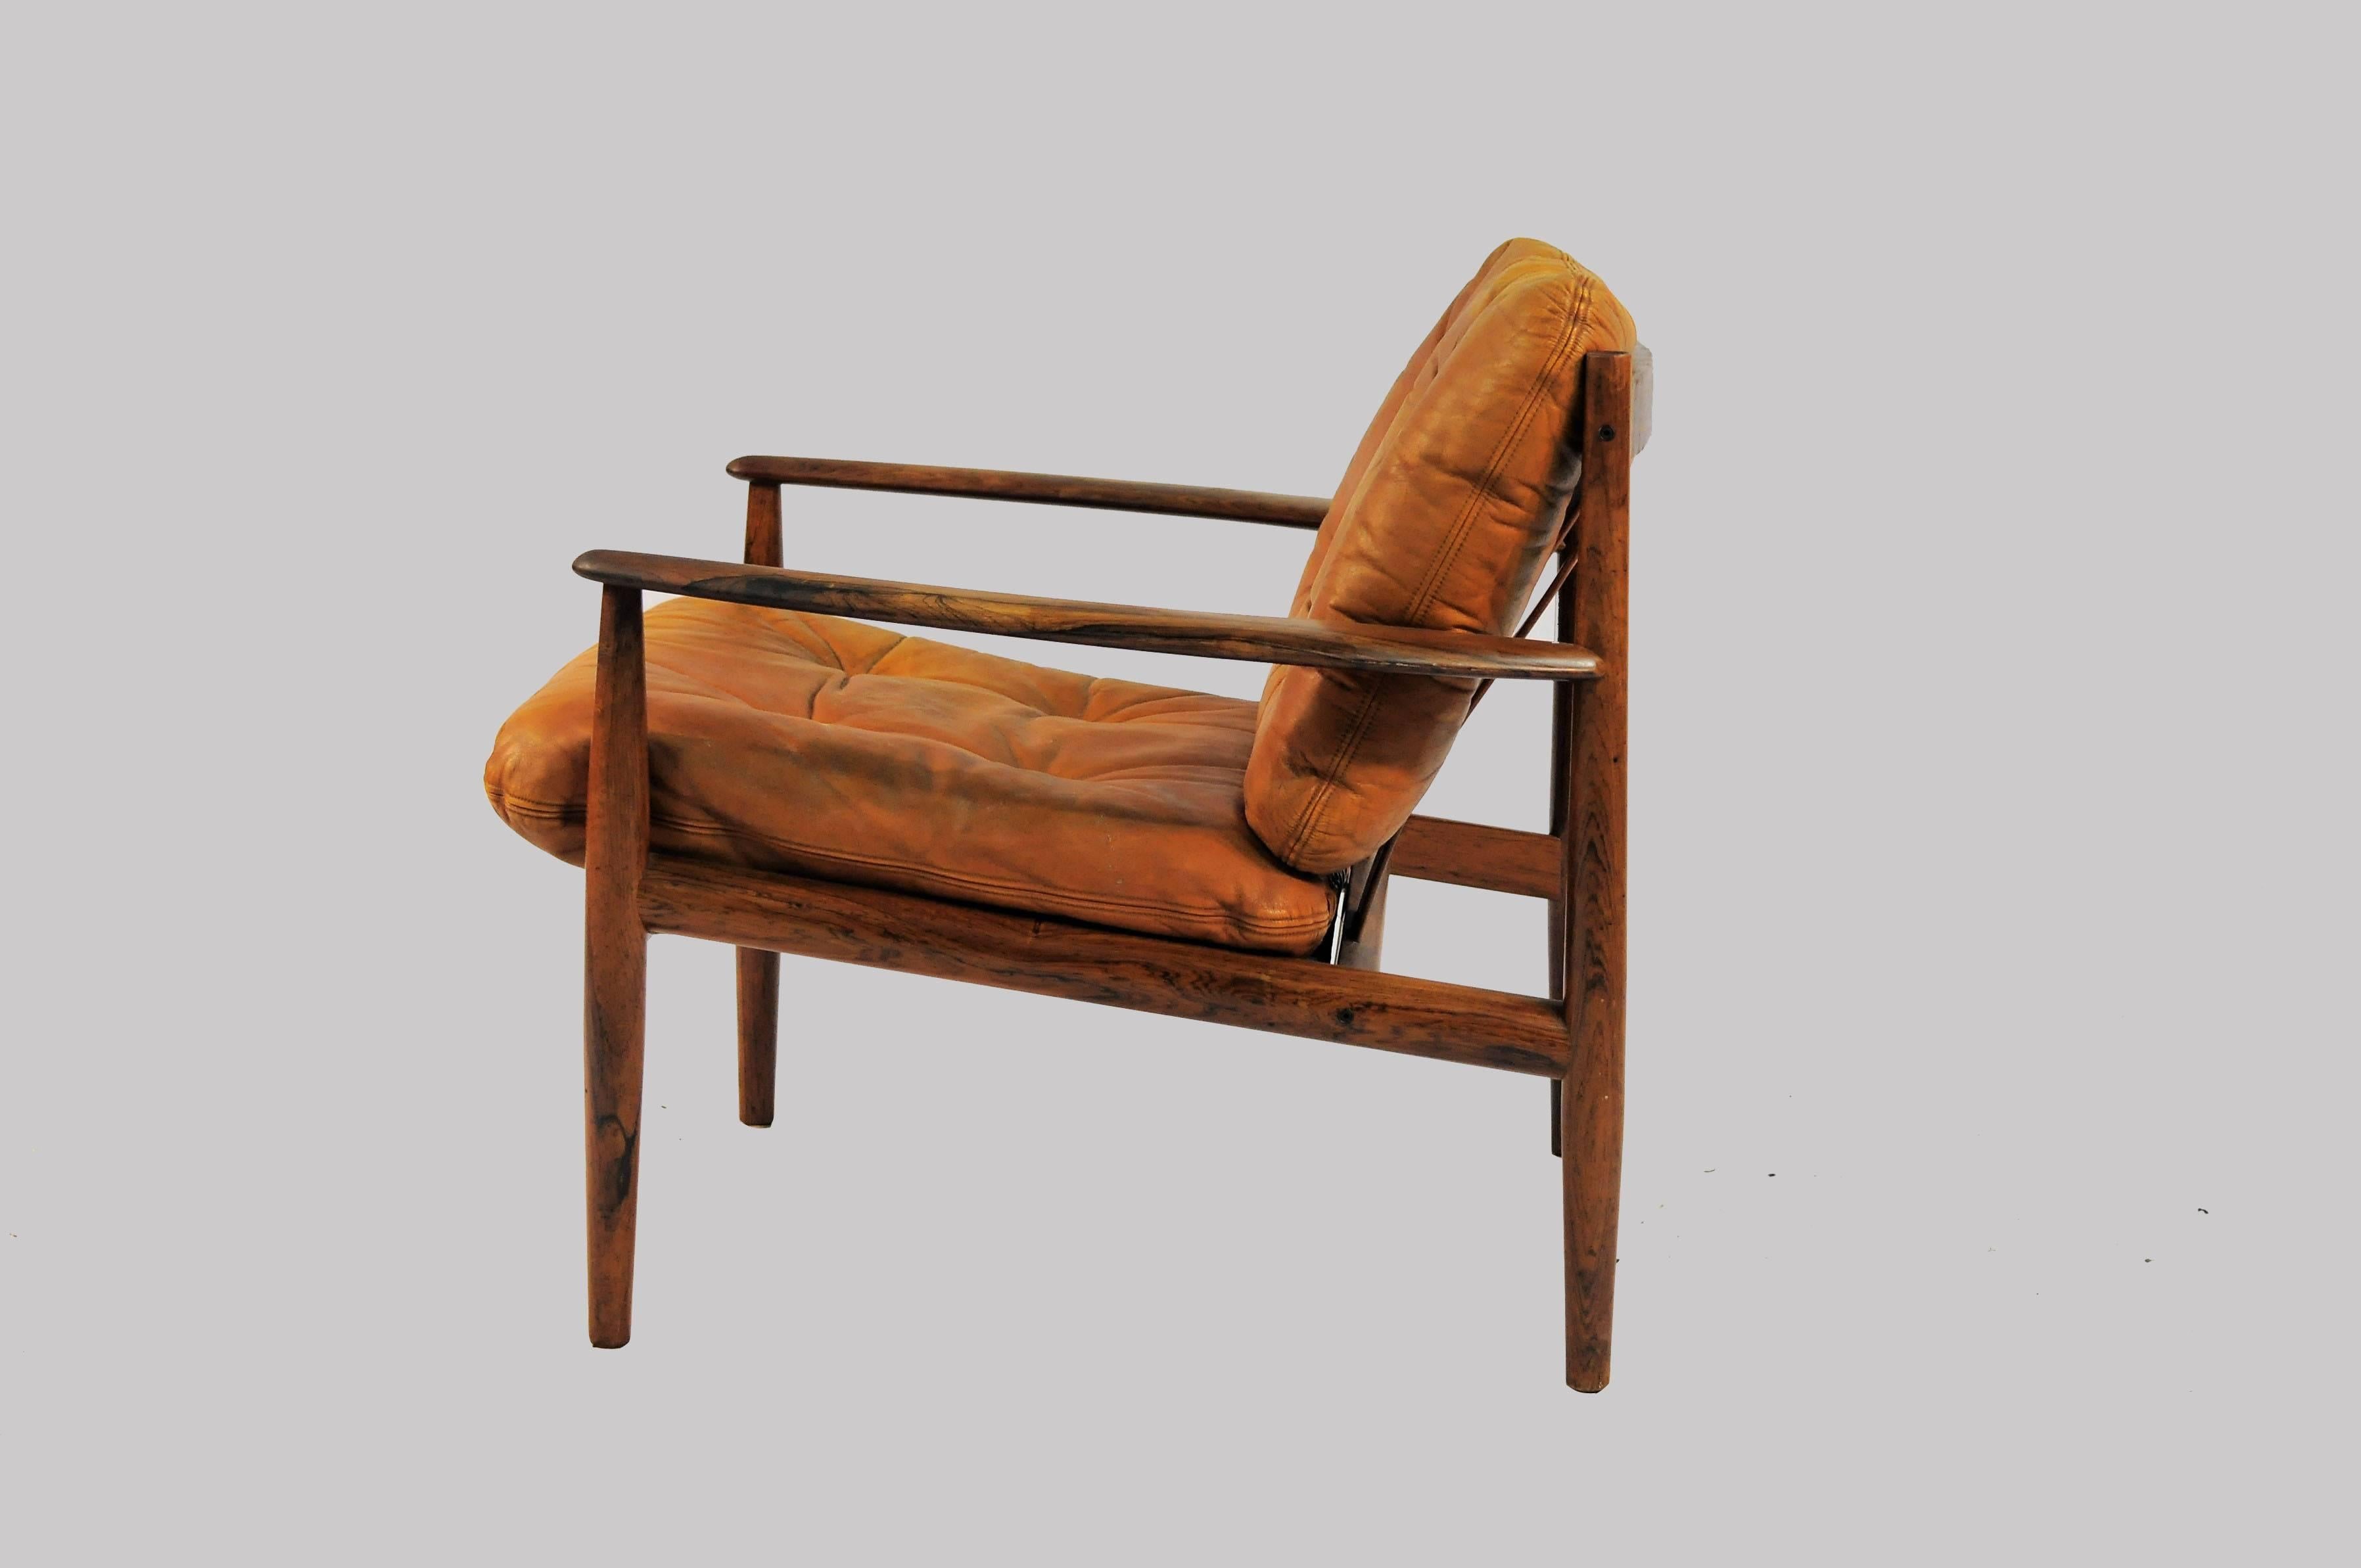 Scandinavian Modern 1960s Grete Jalk Lounge Chairs in Rosewood and Original Brown Leather Cushions